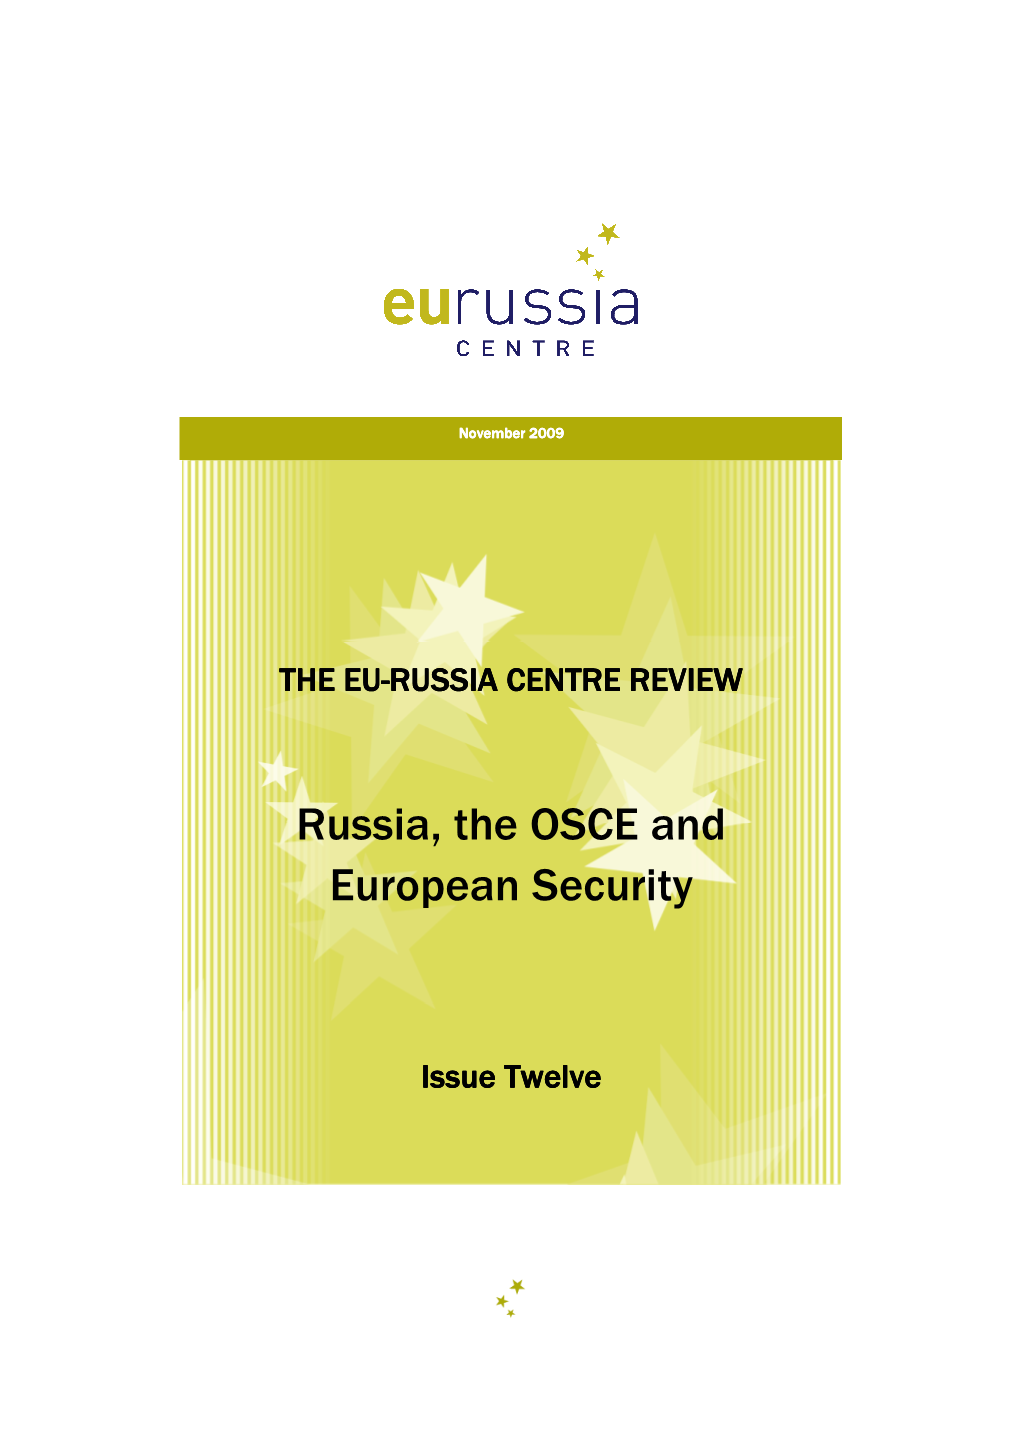 Russia, the OSCE and European Security